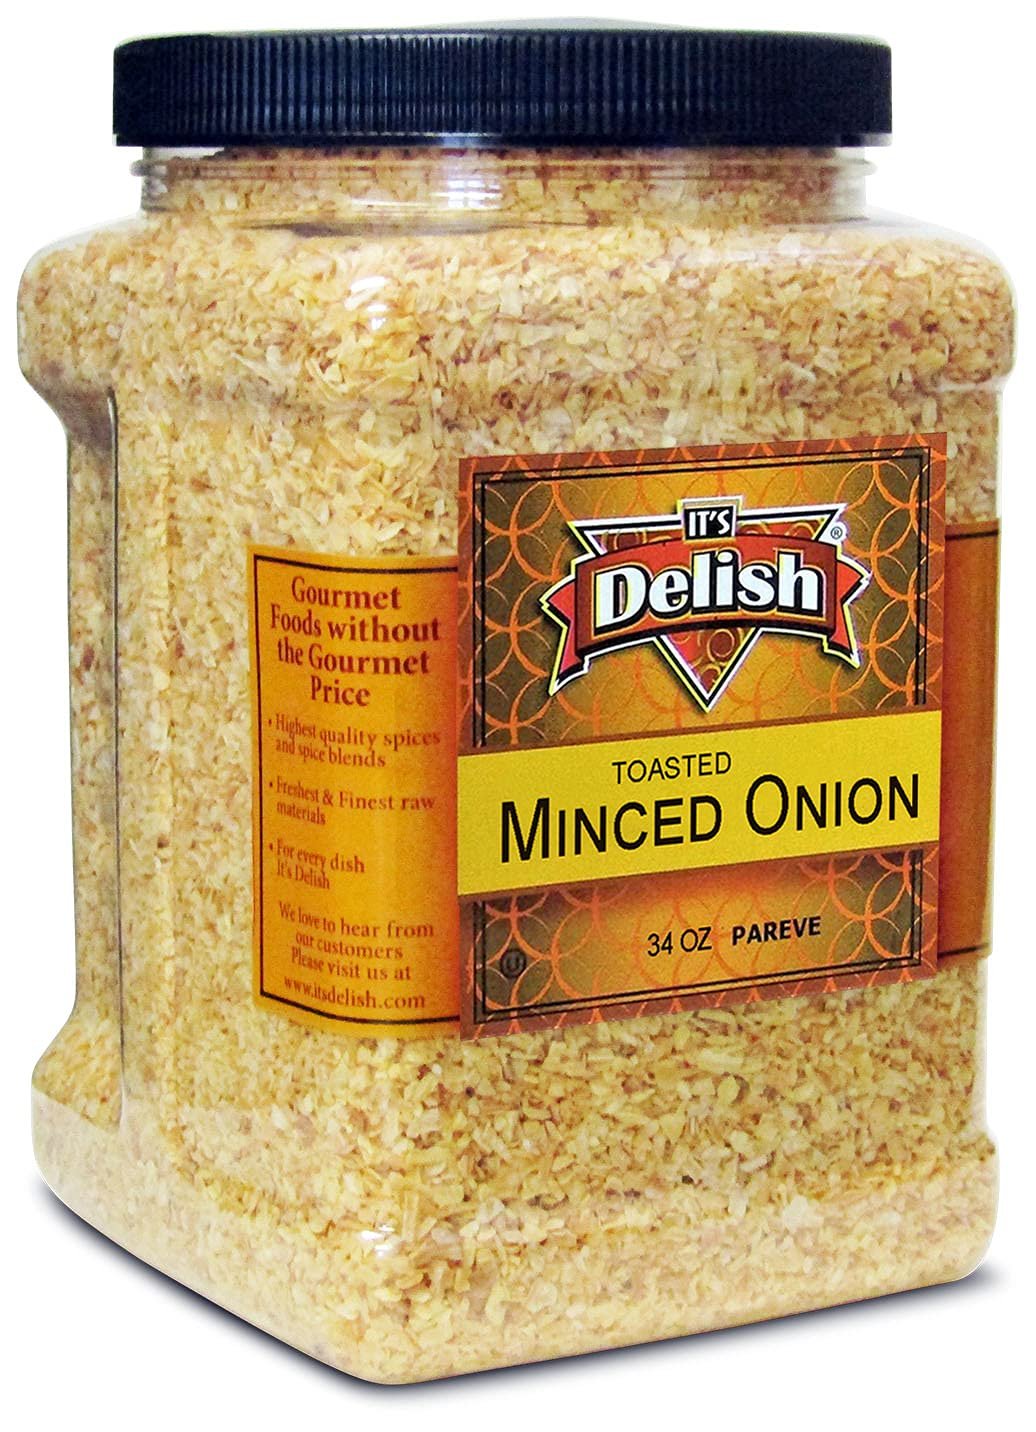 Gourmet Toasted Dried Minced Onion by Its Delish, 2.1 lbs 34 oz Jumbo Container Jar All Natural Dry Roasted Chopped Onion, No Preservatives, No